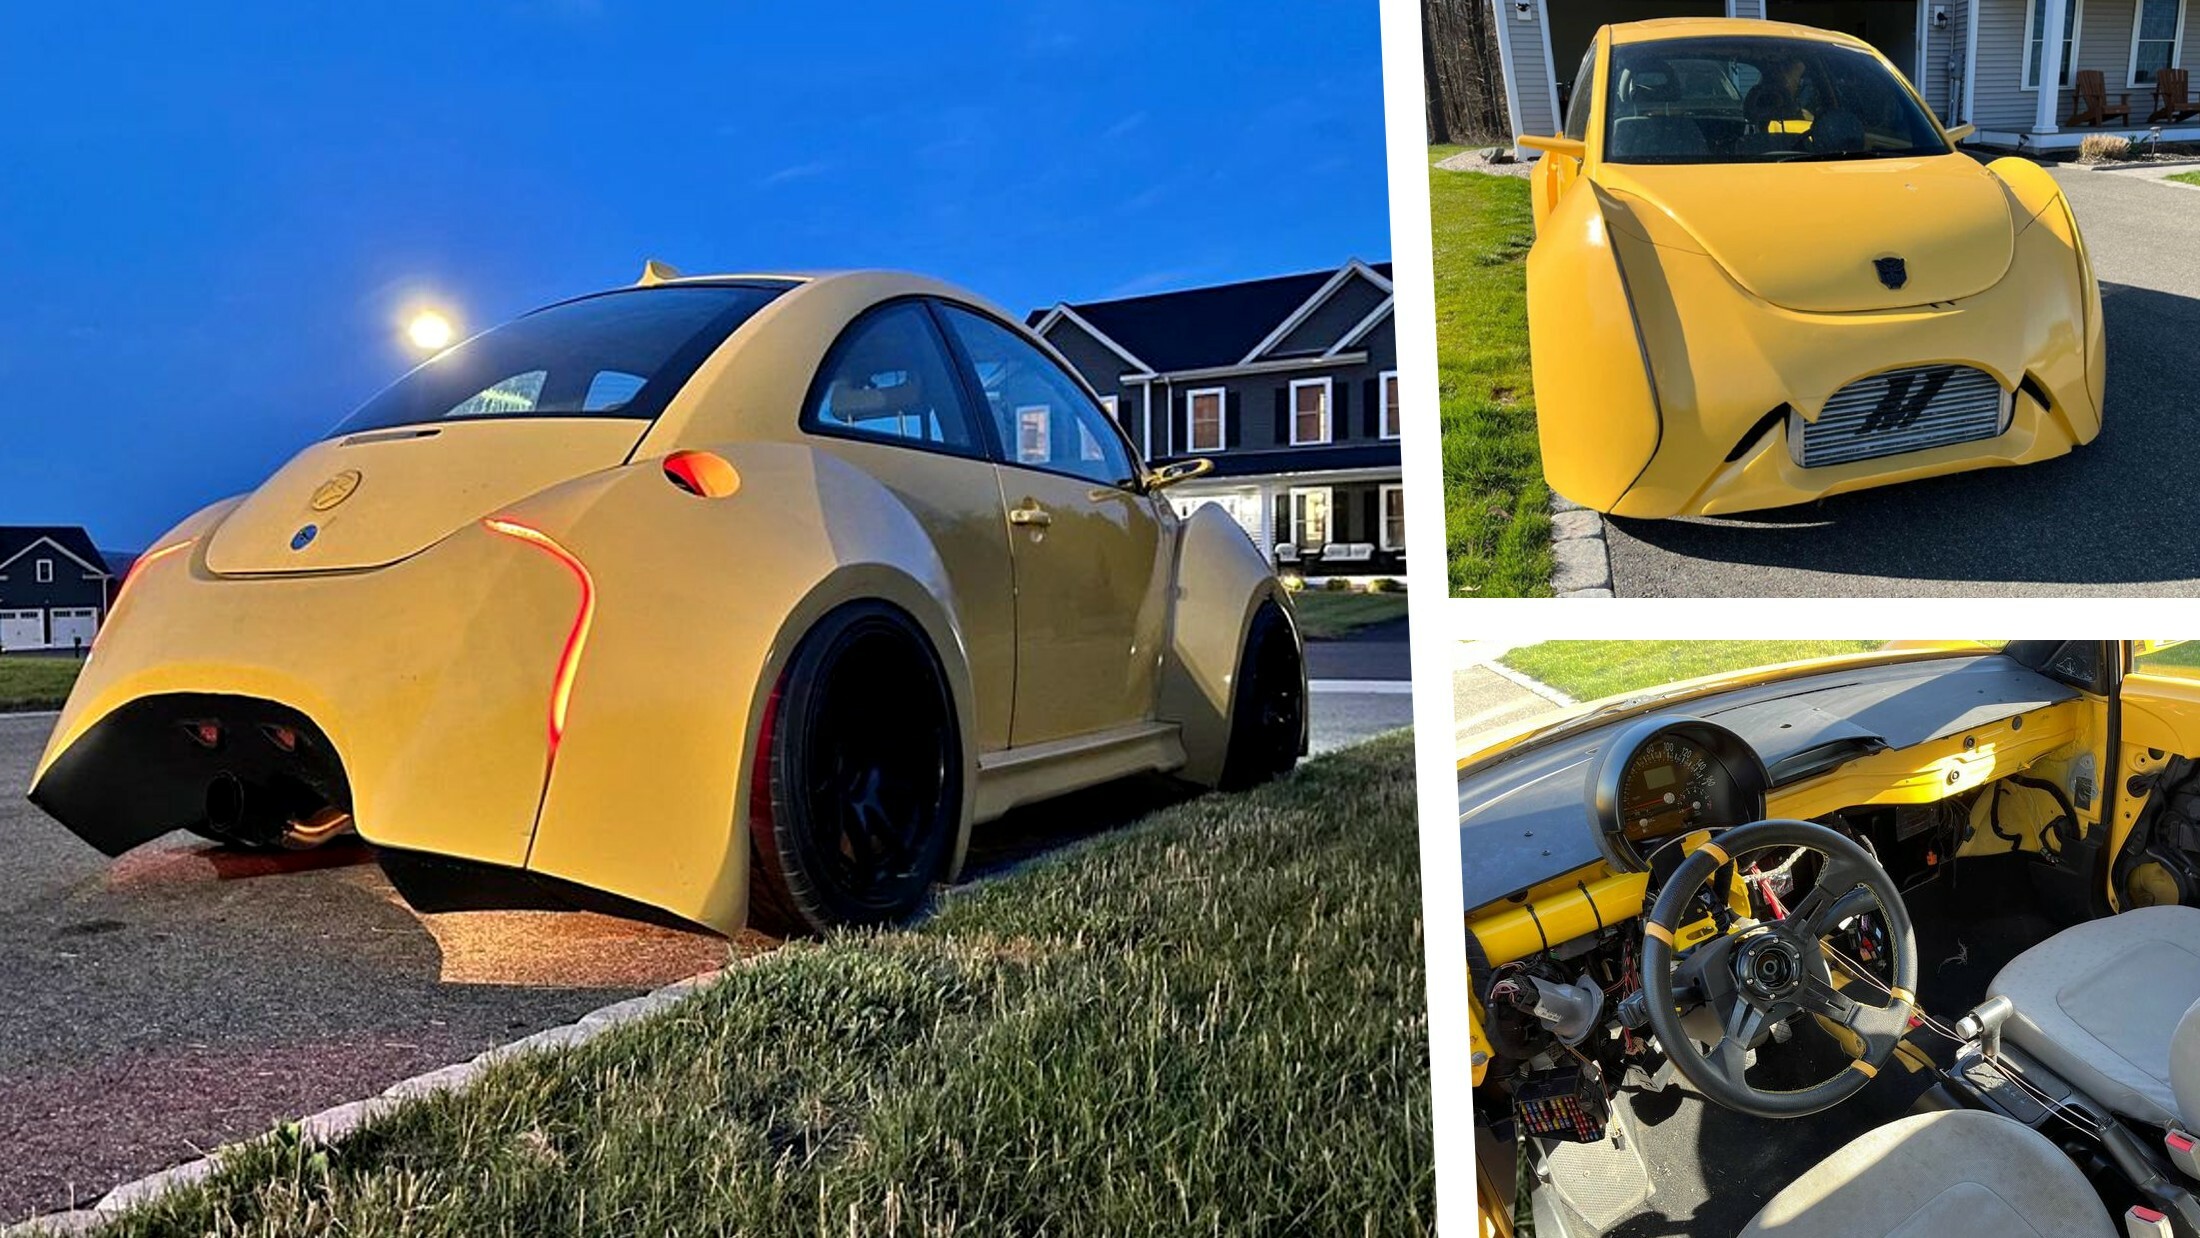 VW Beetle With A Futuristic Makeover Could Be Yours For $4.5k